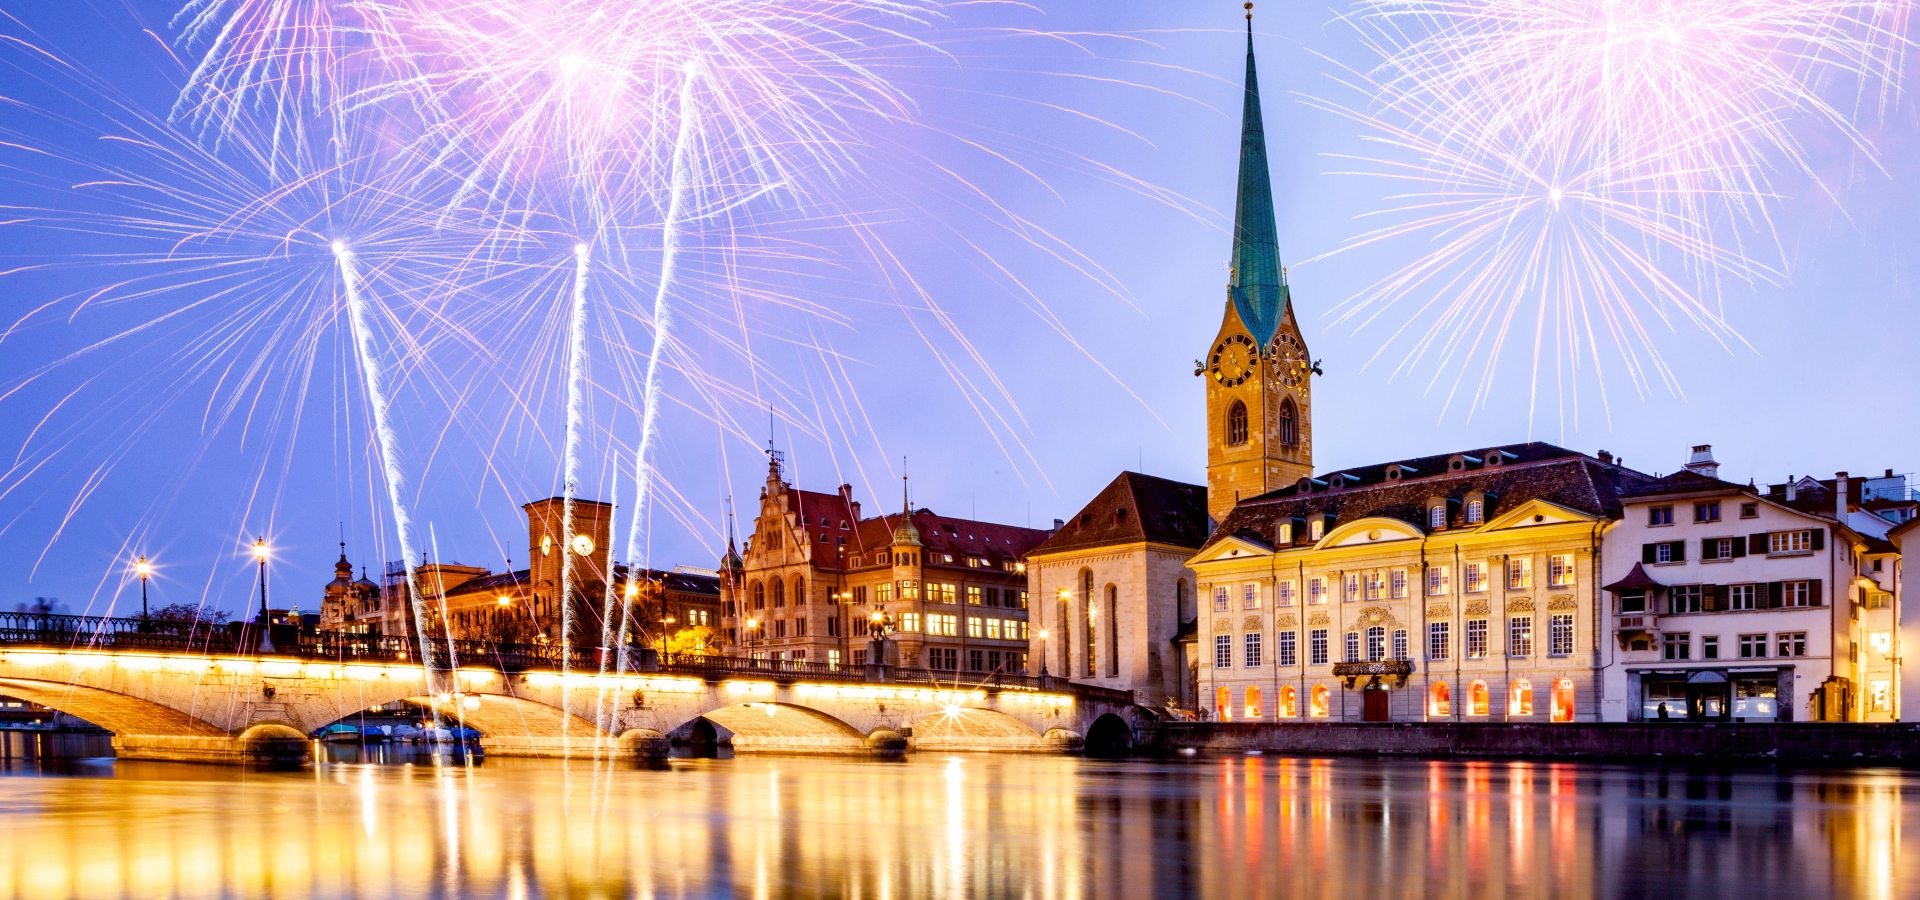 new year fireworks over Zurich city center with famous Fraumunster and Grossmunster Churches and river Limmat at Lake Zurich, Canton of Zurich, Switzerland